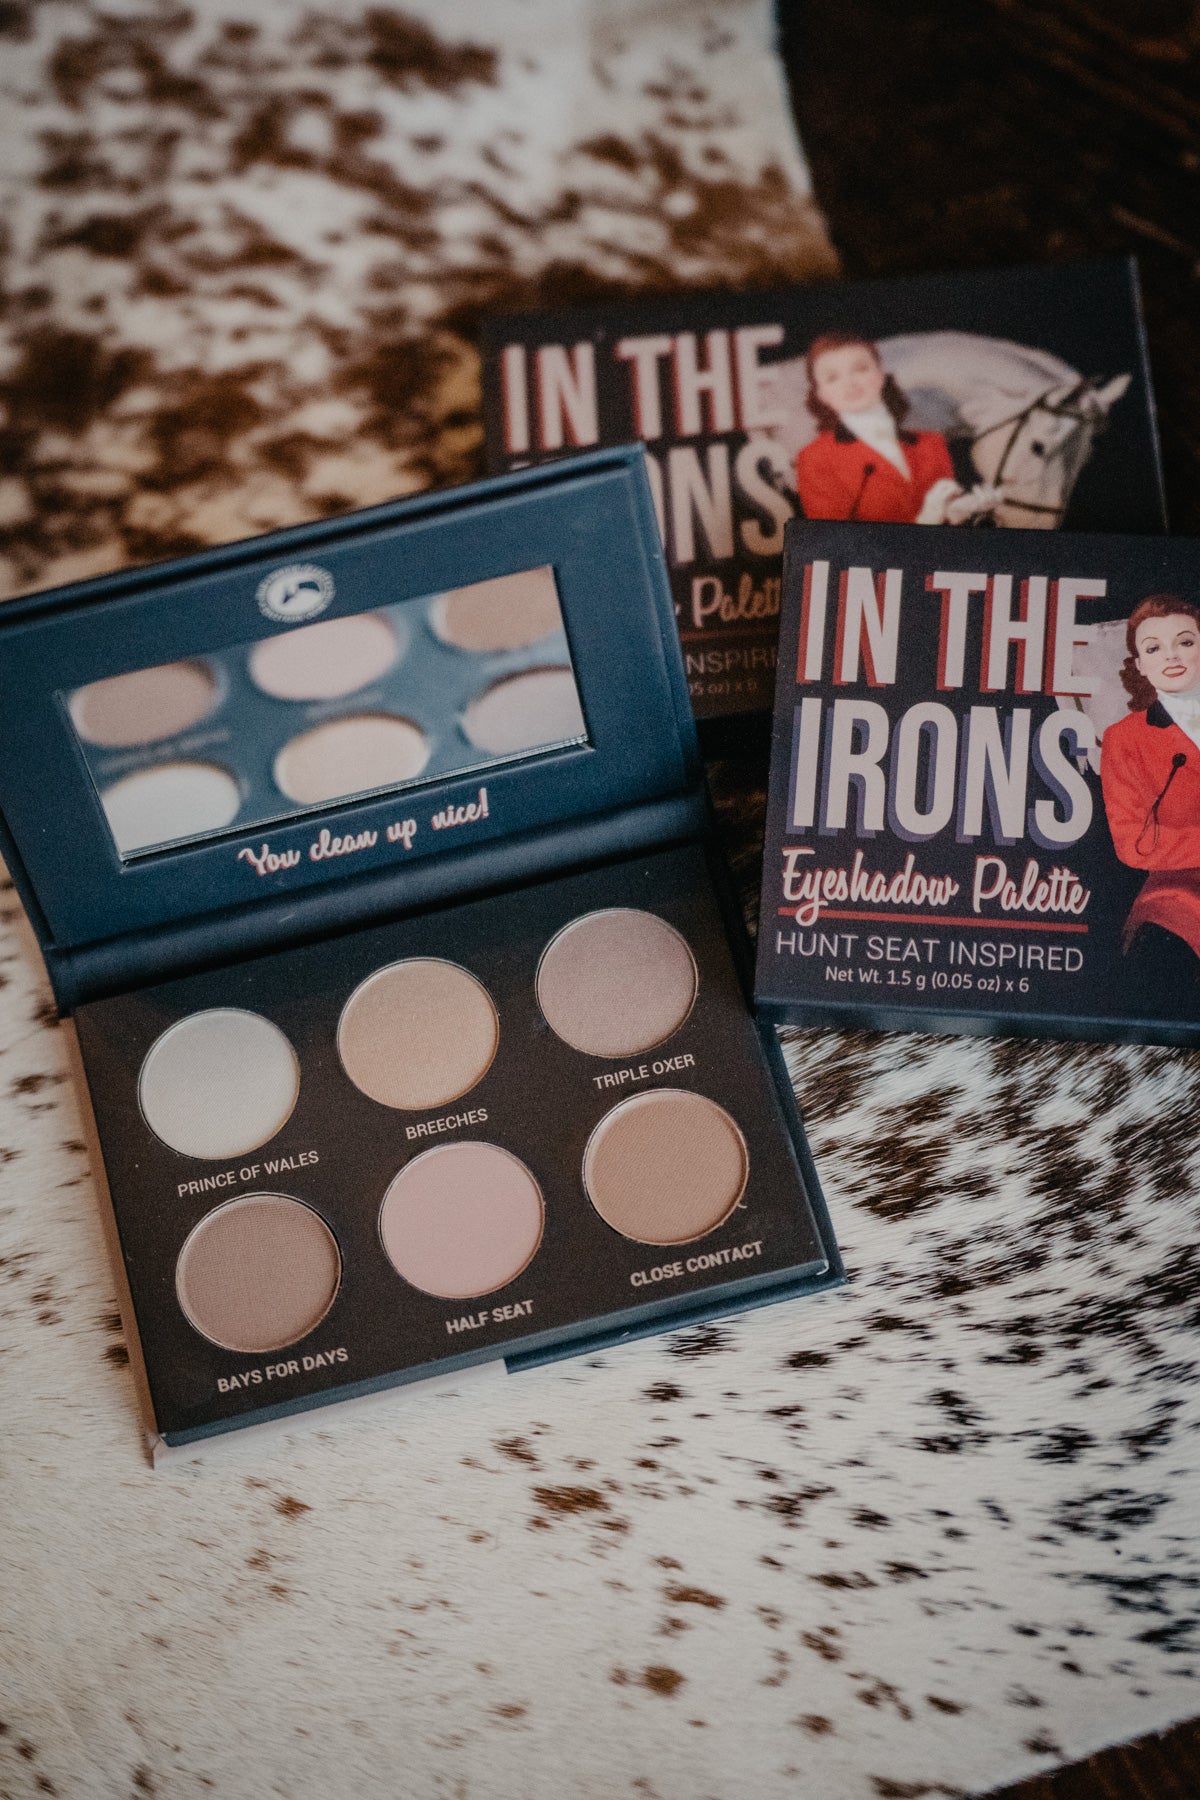 Equestrian Themed USA-Made Eye Shadow Palettes (2 Versions)